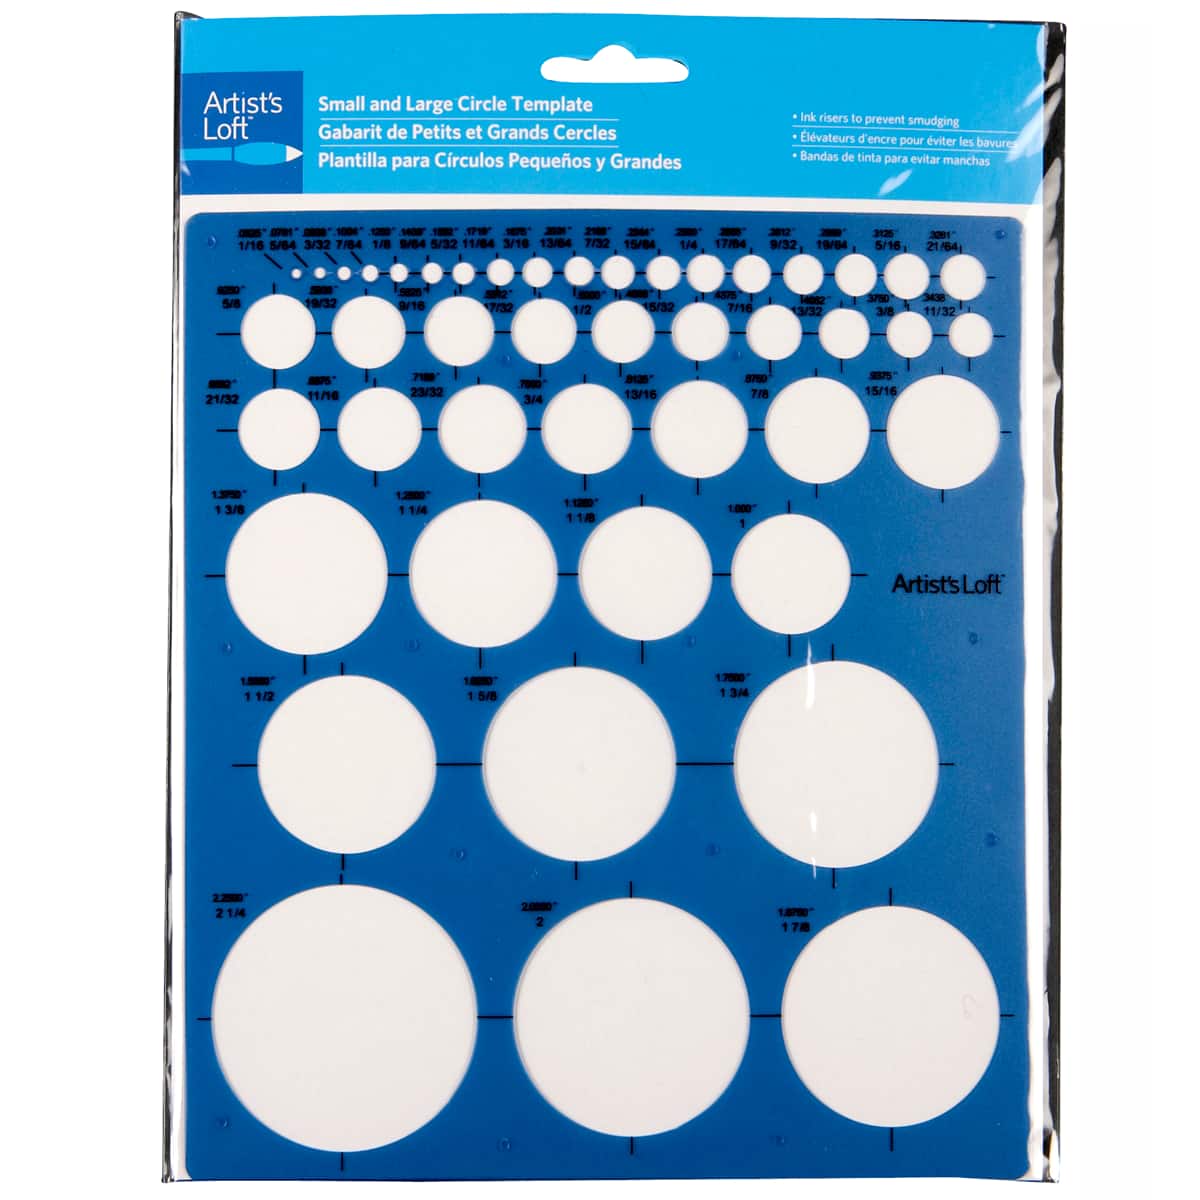 PROFESSIONAL LARGE GIANT CIRCLE RADIUS DRAWING TEMPLATE STENCILS 2mm-90mm 